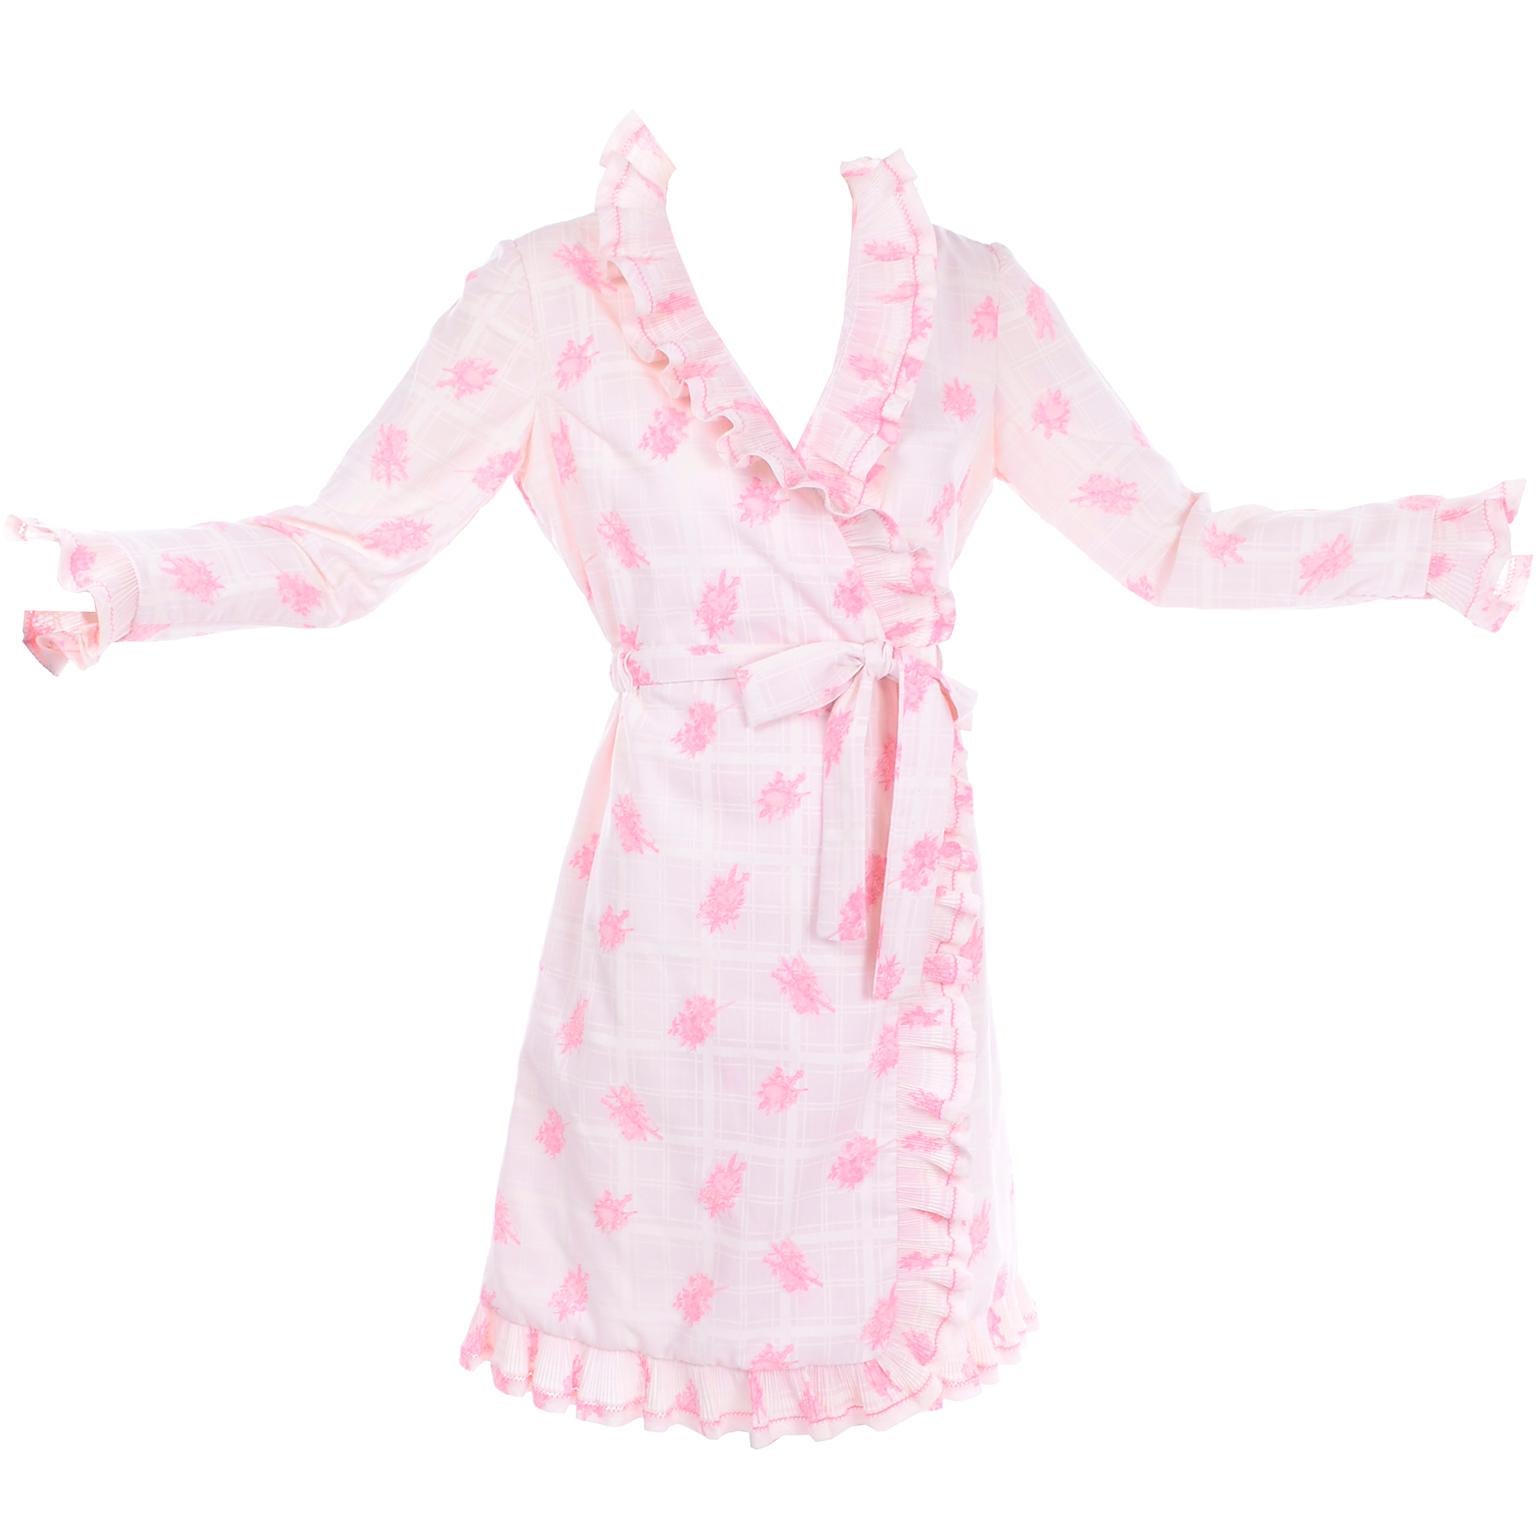 Bill Tice 1970s Vintage Pink & White Toile Ruffled Cotton Wrap Dress Size 6